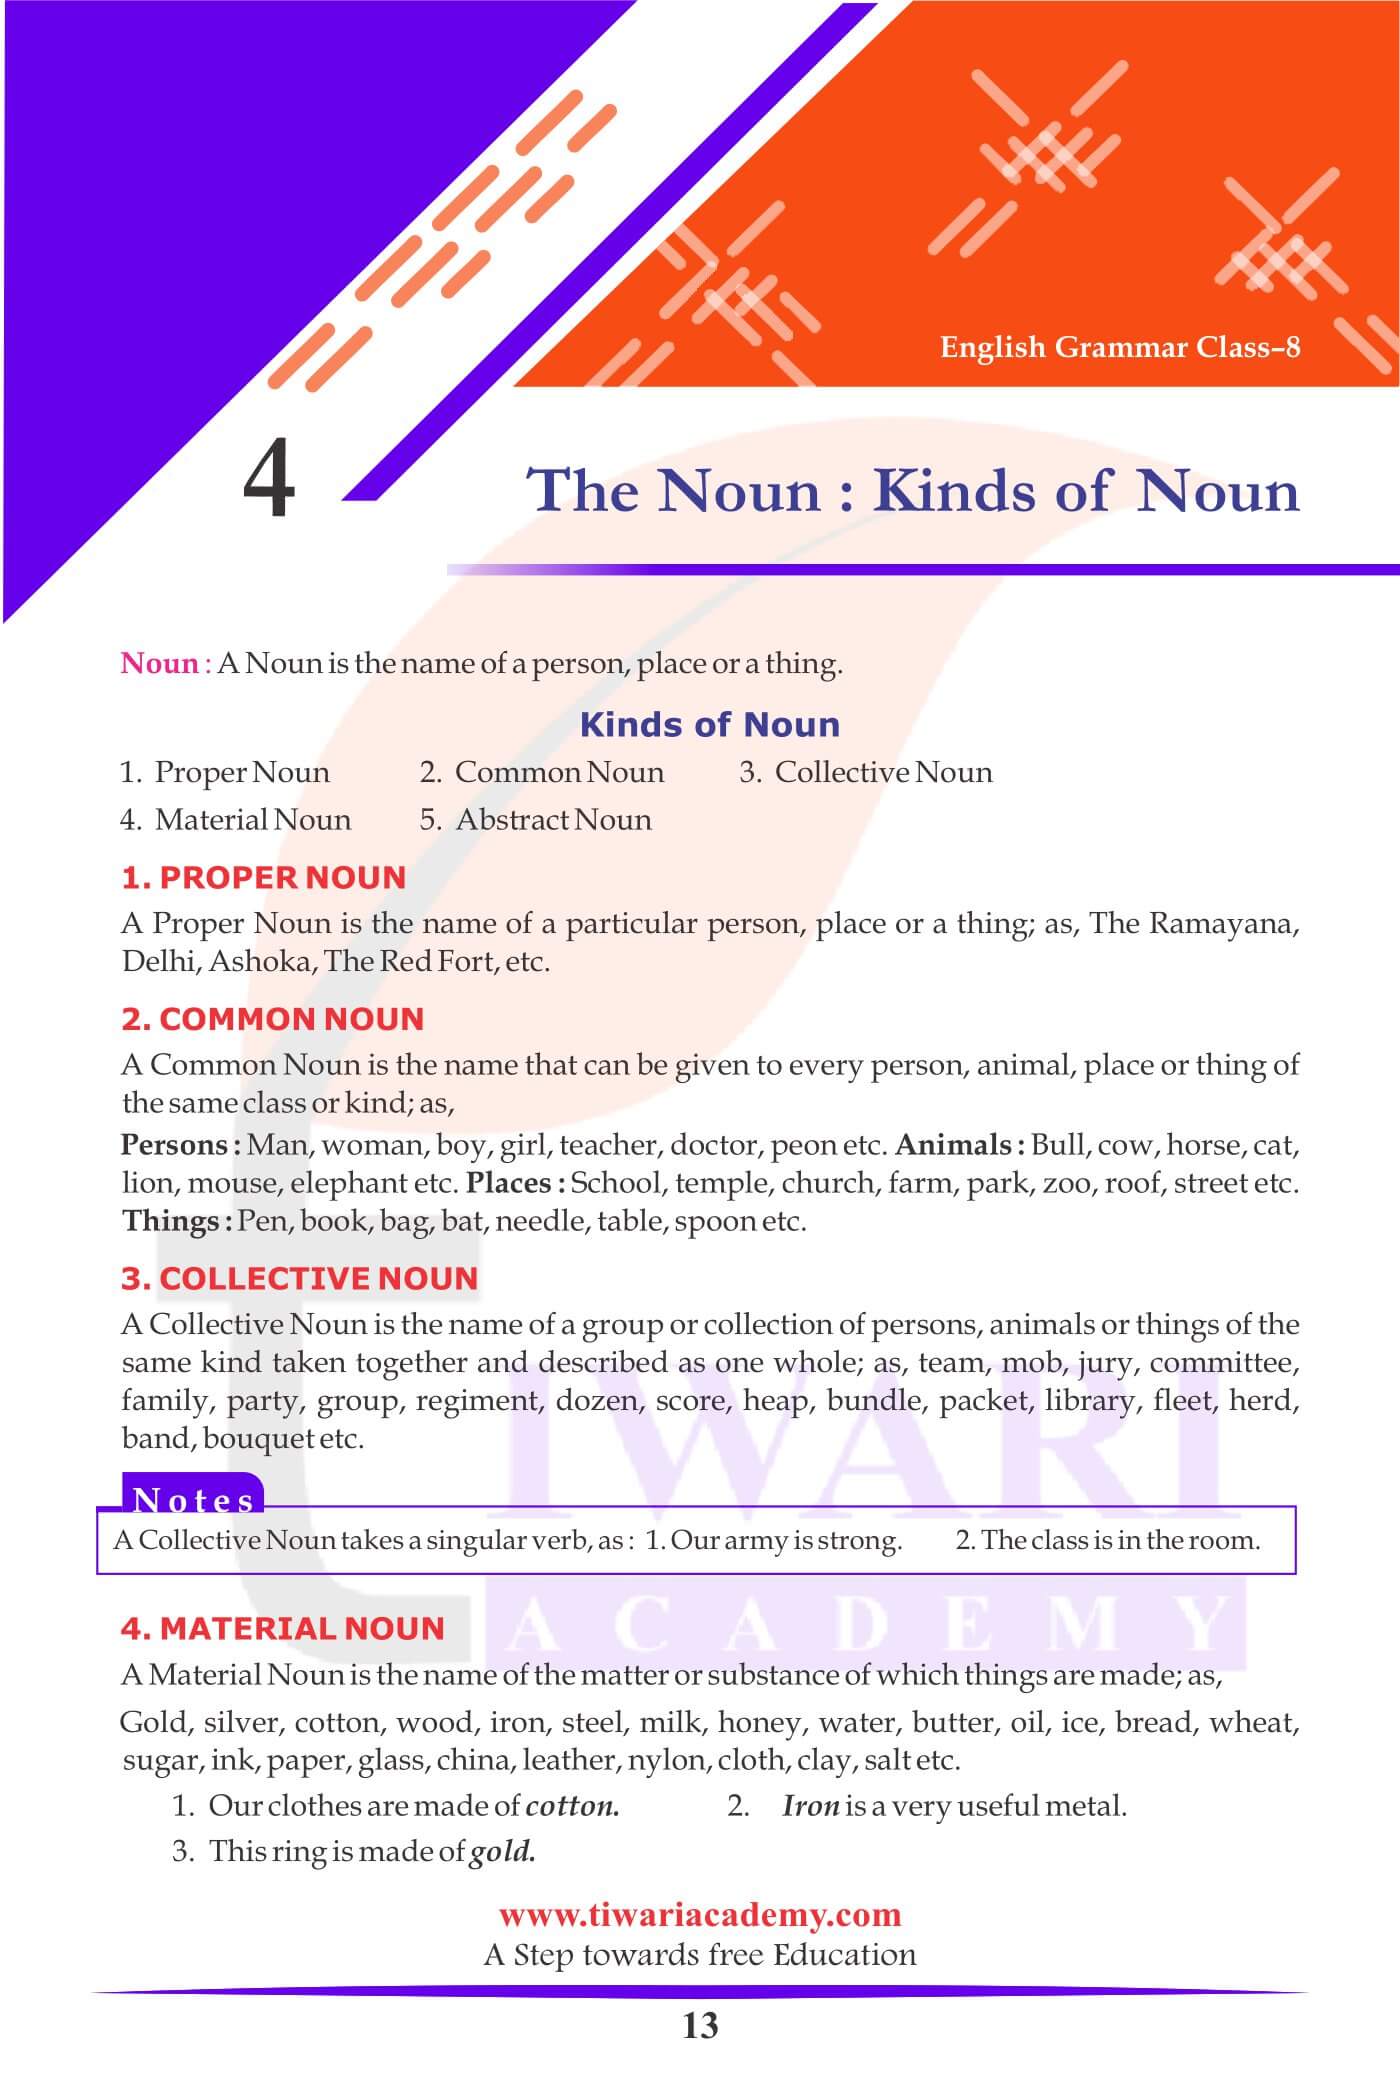 Class 8 english lesson 7 synonyms and antonyms